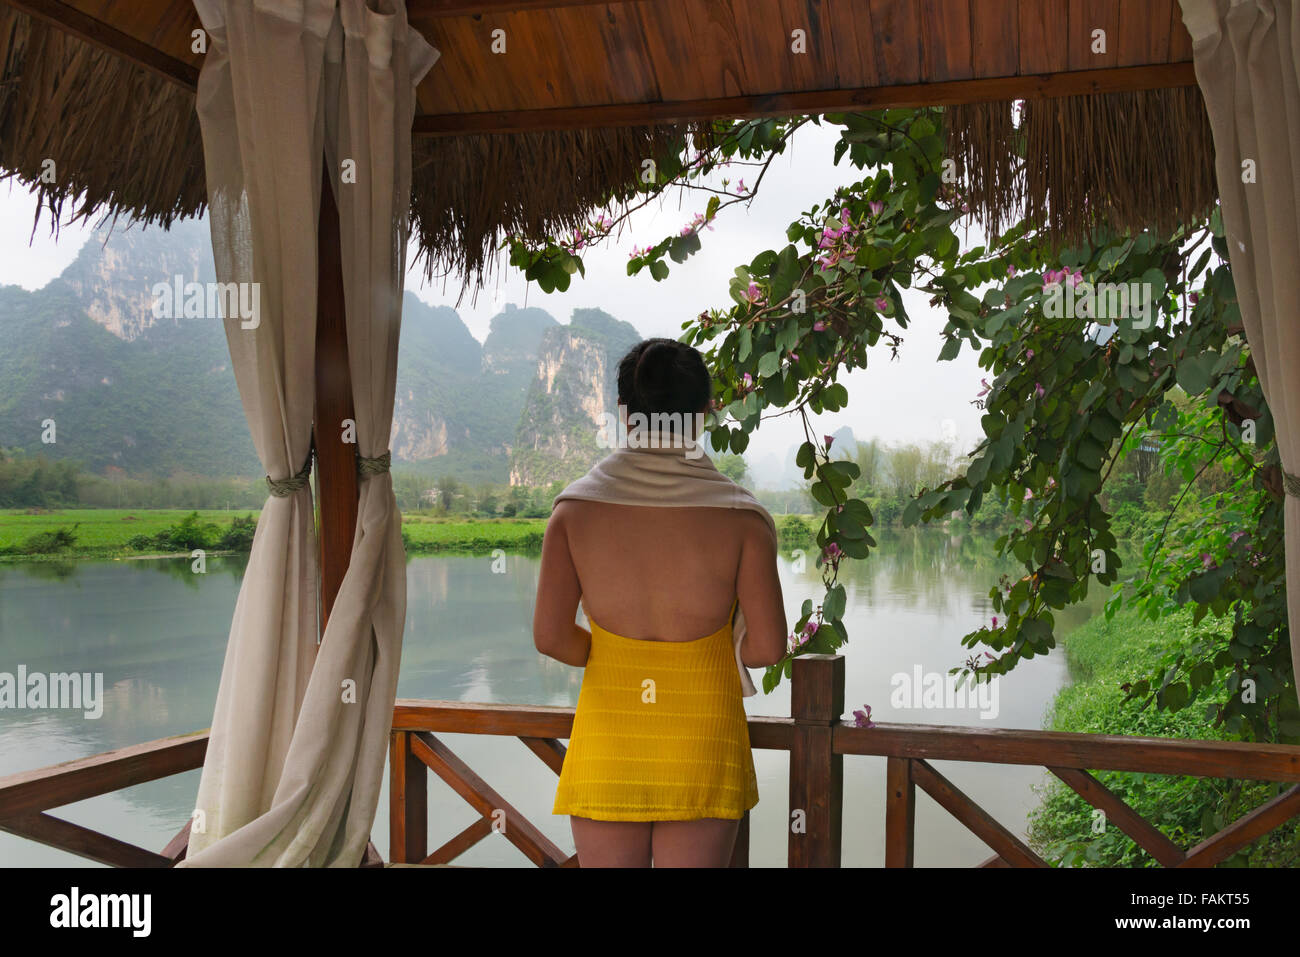 Tourists in spa balcony watching karst hills on Mingshi River, Guangxi Province, China Stock Photo